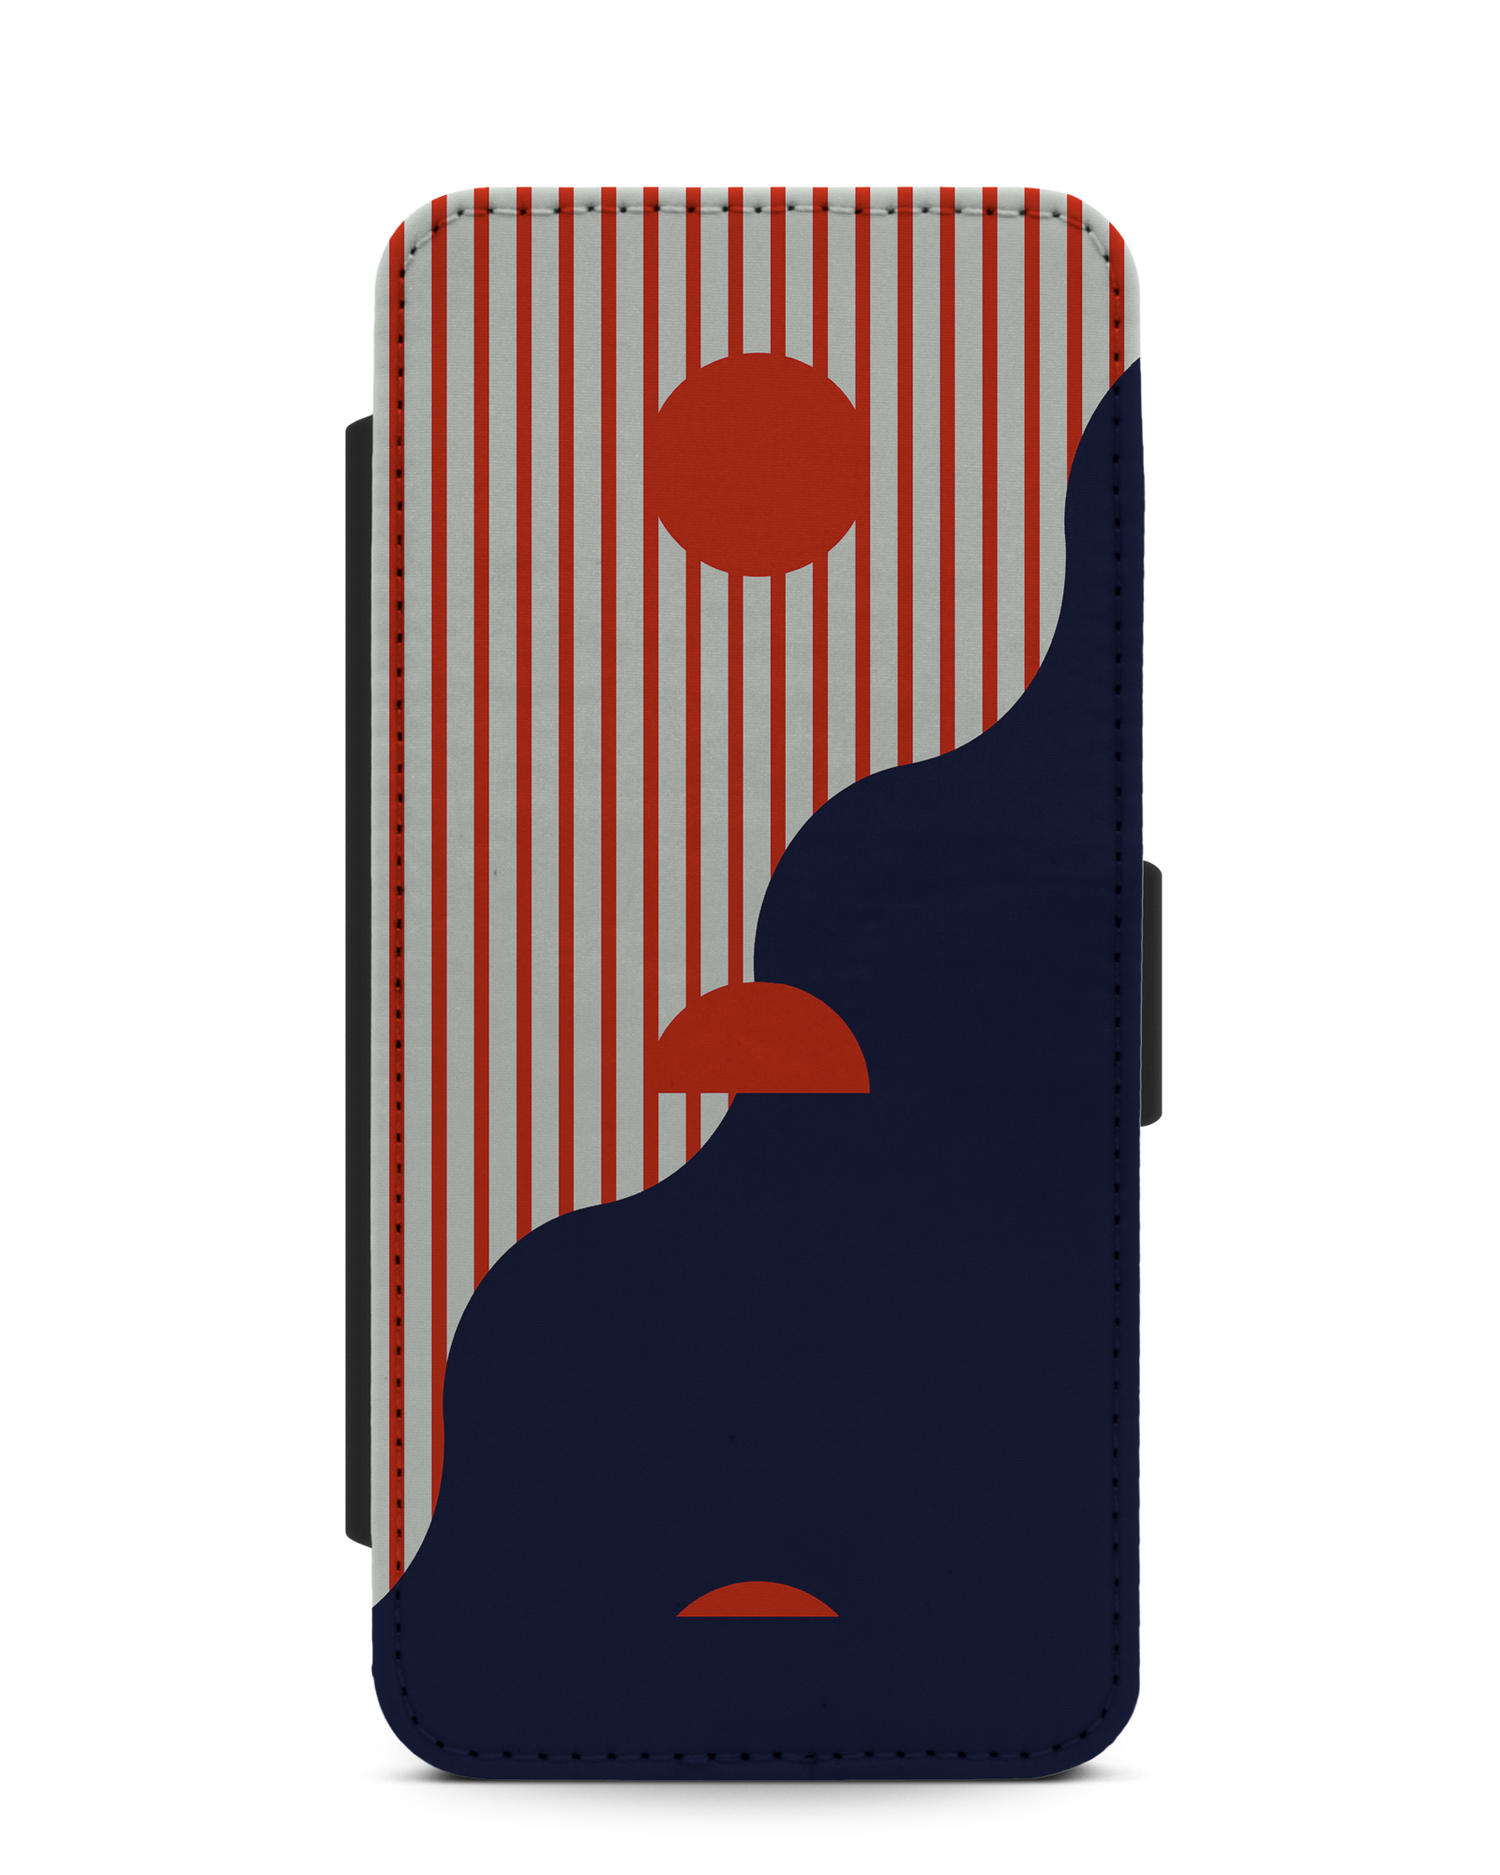 Metric Sunset Wallet Phone Case Samsung Galaxy S10: Front View